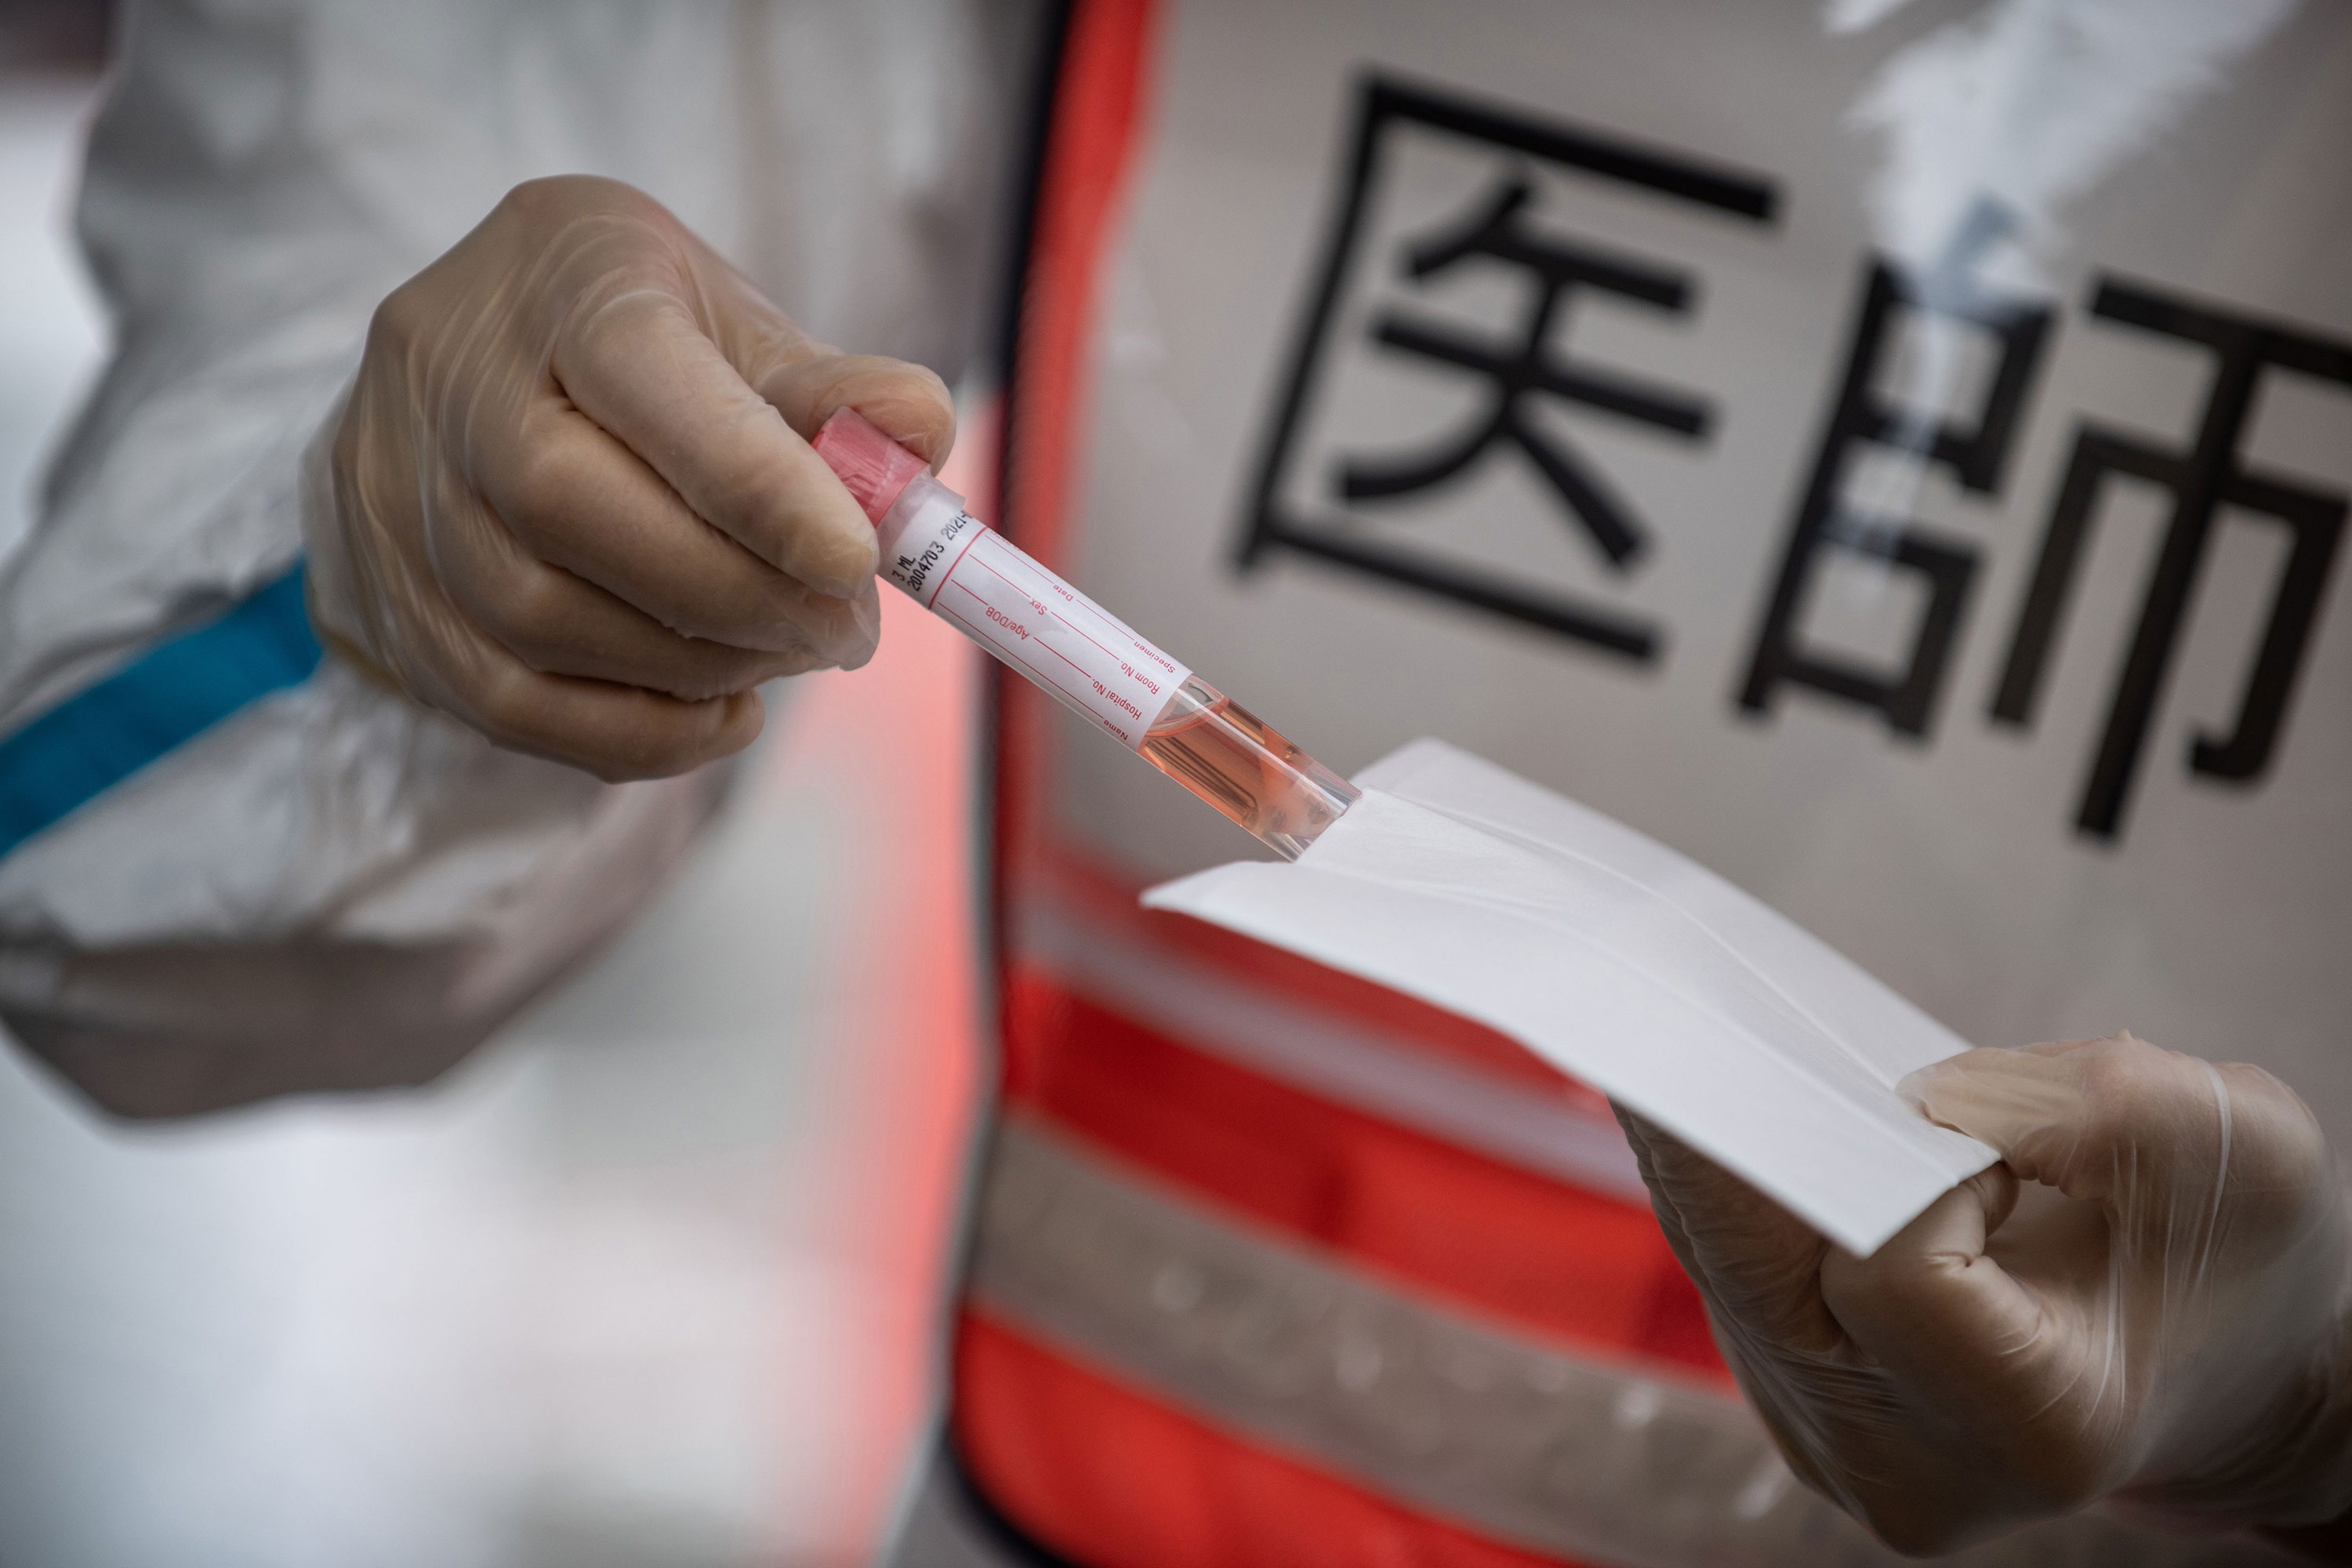 A doctor holds a coronavirus test sample at a drive-thru testing site in Fujisawa, Japan, on April 27.